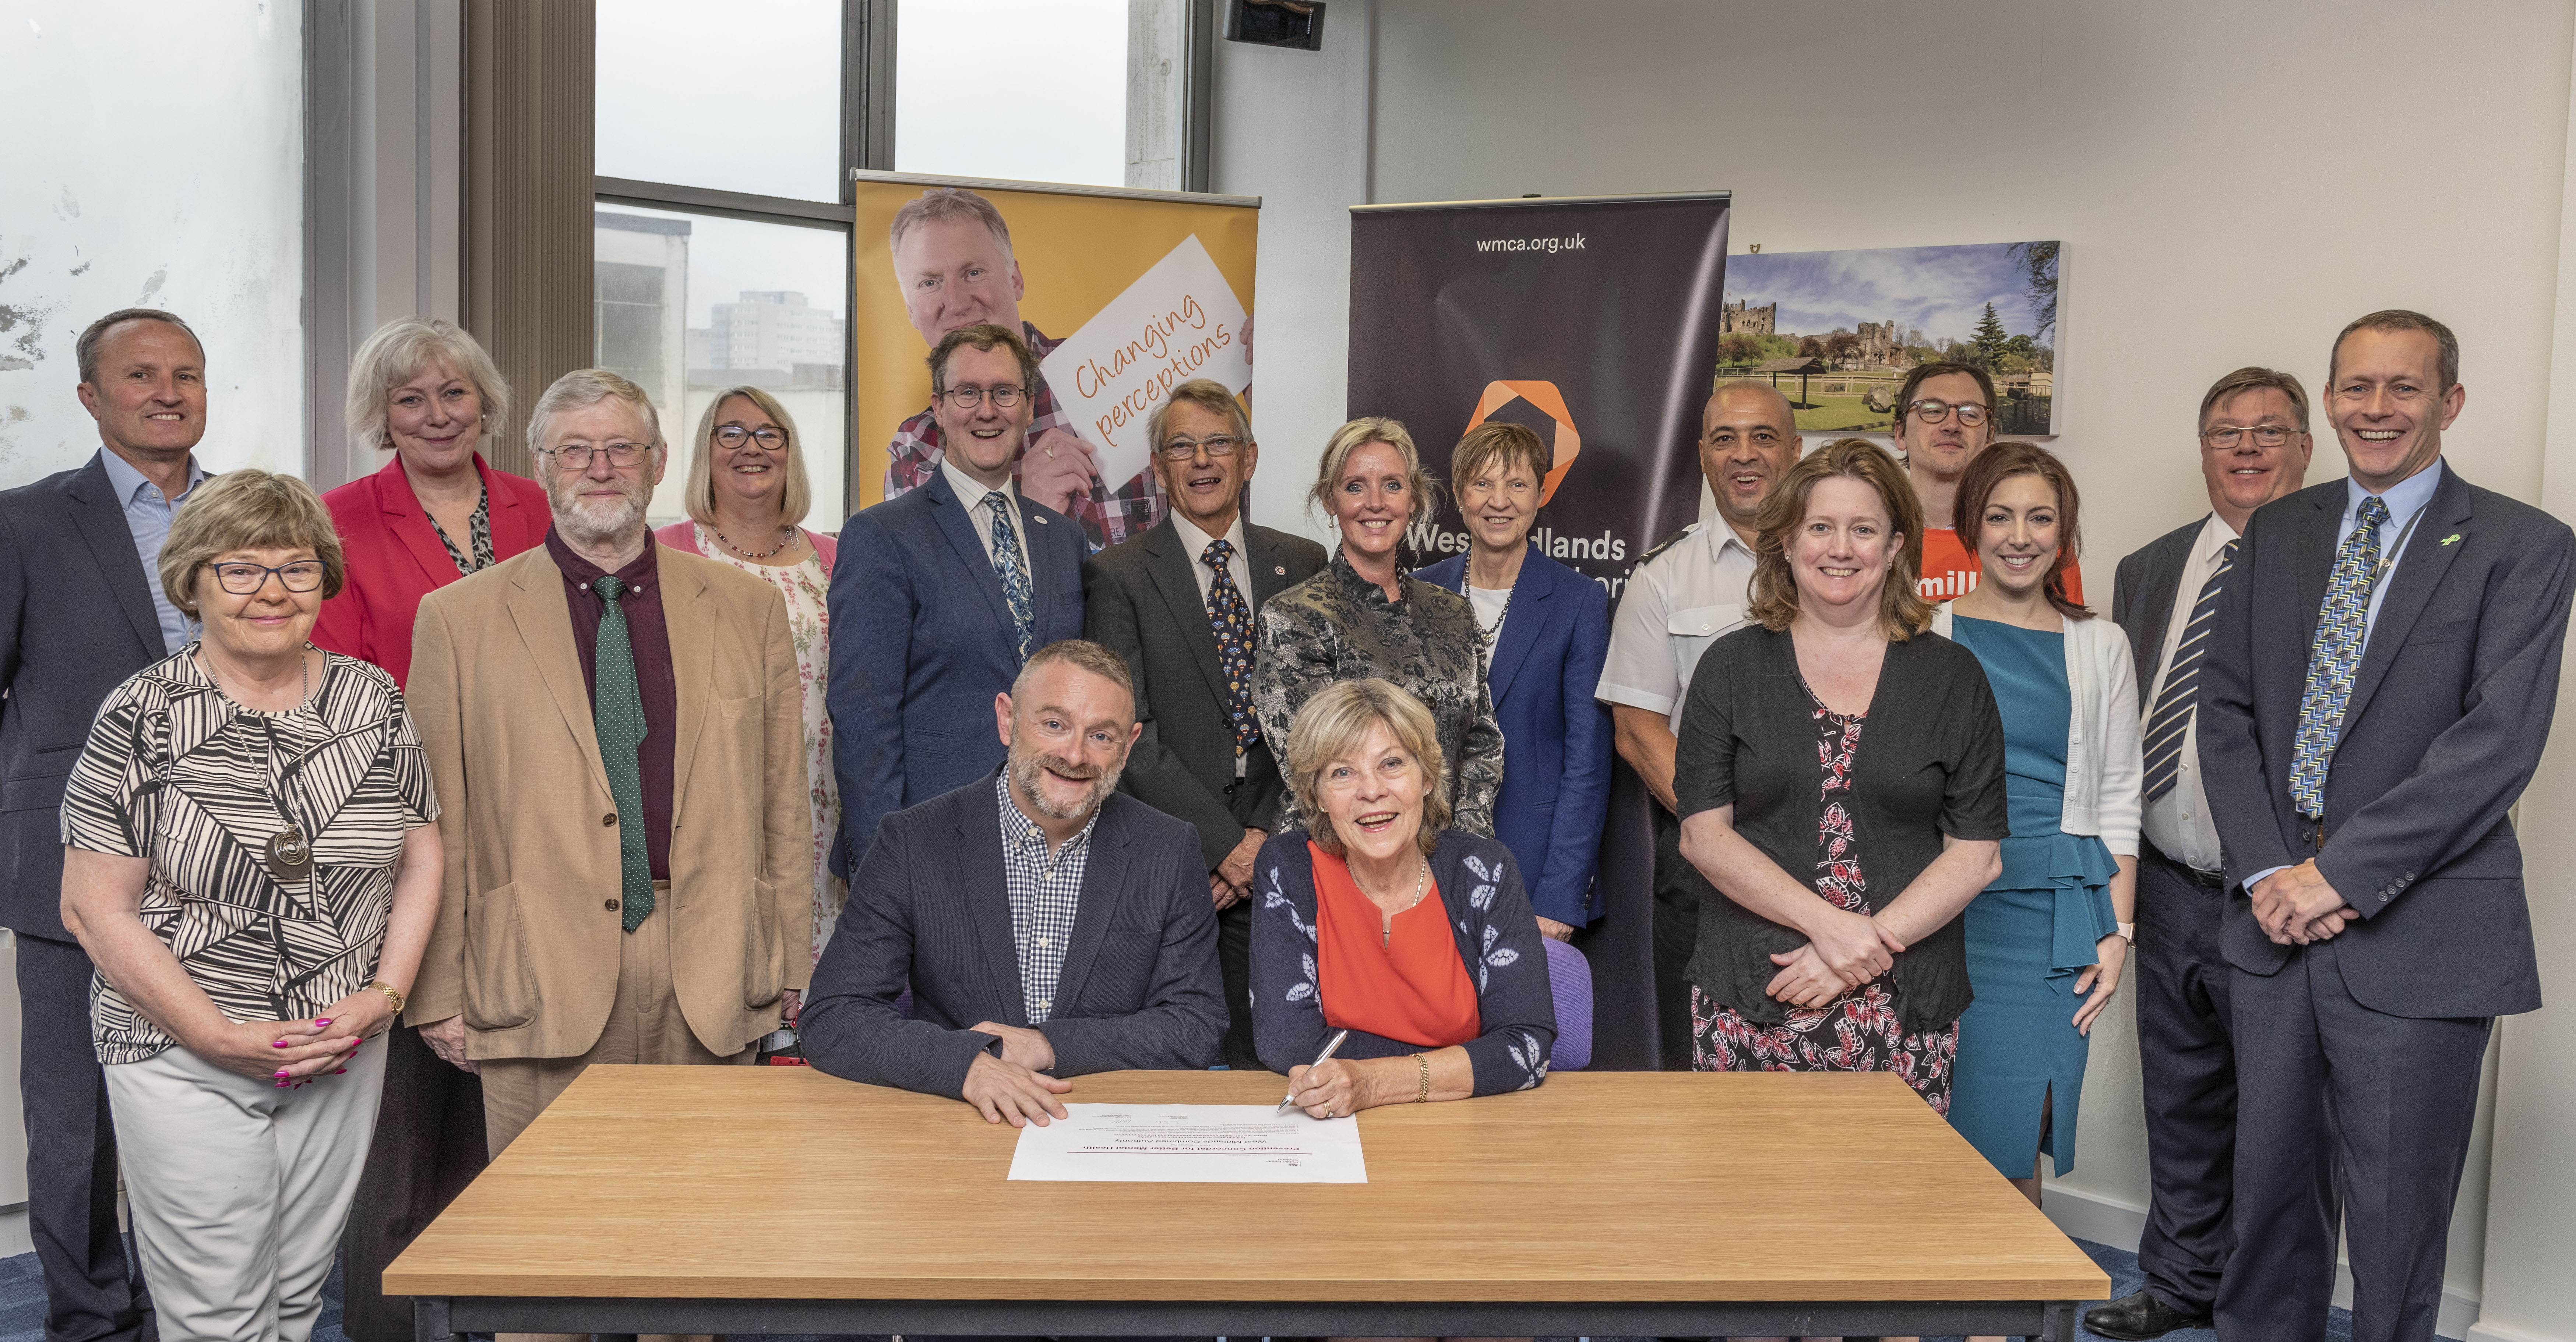 Members of the WMCA’s Wellbeing Board with (front) L-R Paul Sanderson, Health and Wellbeing programme lead for Public Health England in the West Midlands, and Wellbeing Board chair Cllr Izzi Seccombe signing the Prevention Concordat for Better Mental Health